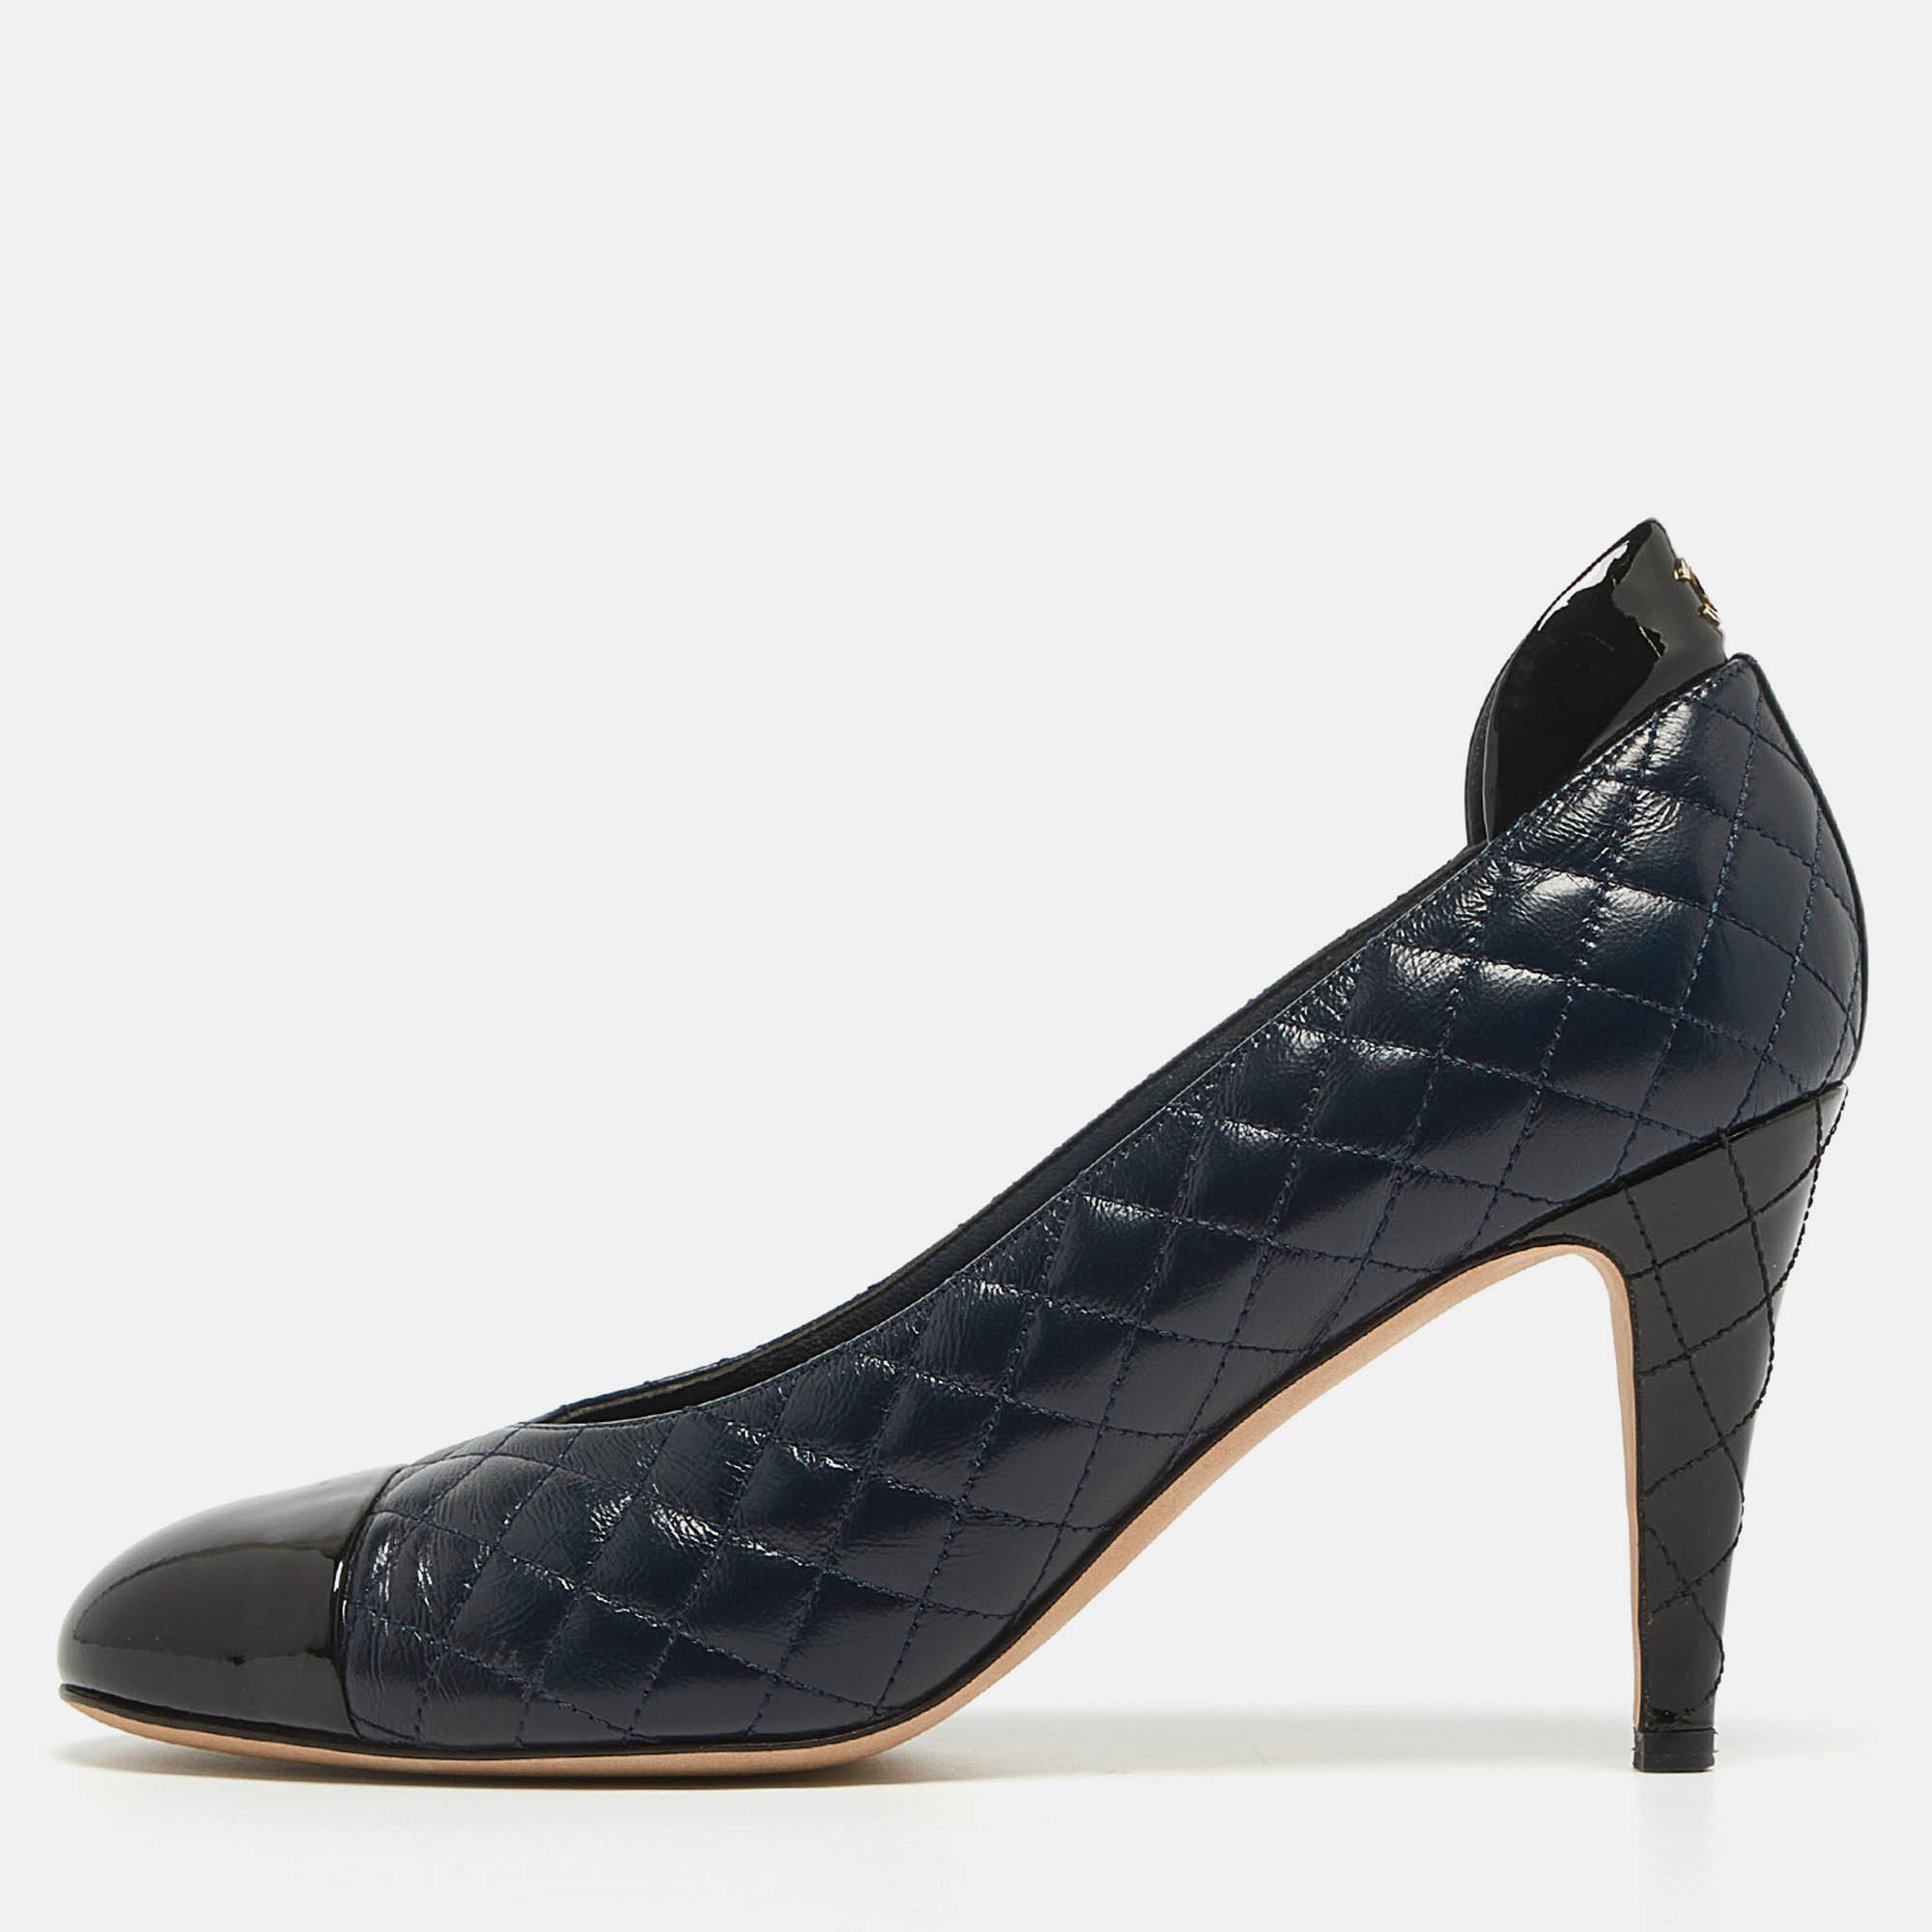 Chanel navy blue/black quilted leather and patent cc pumps size 41